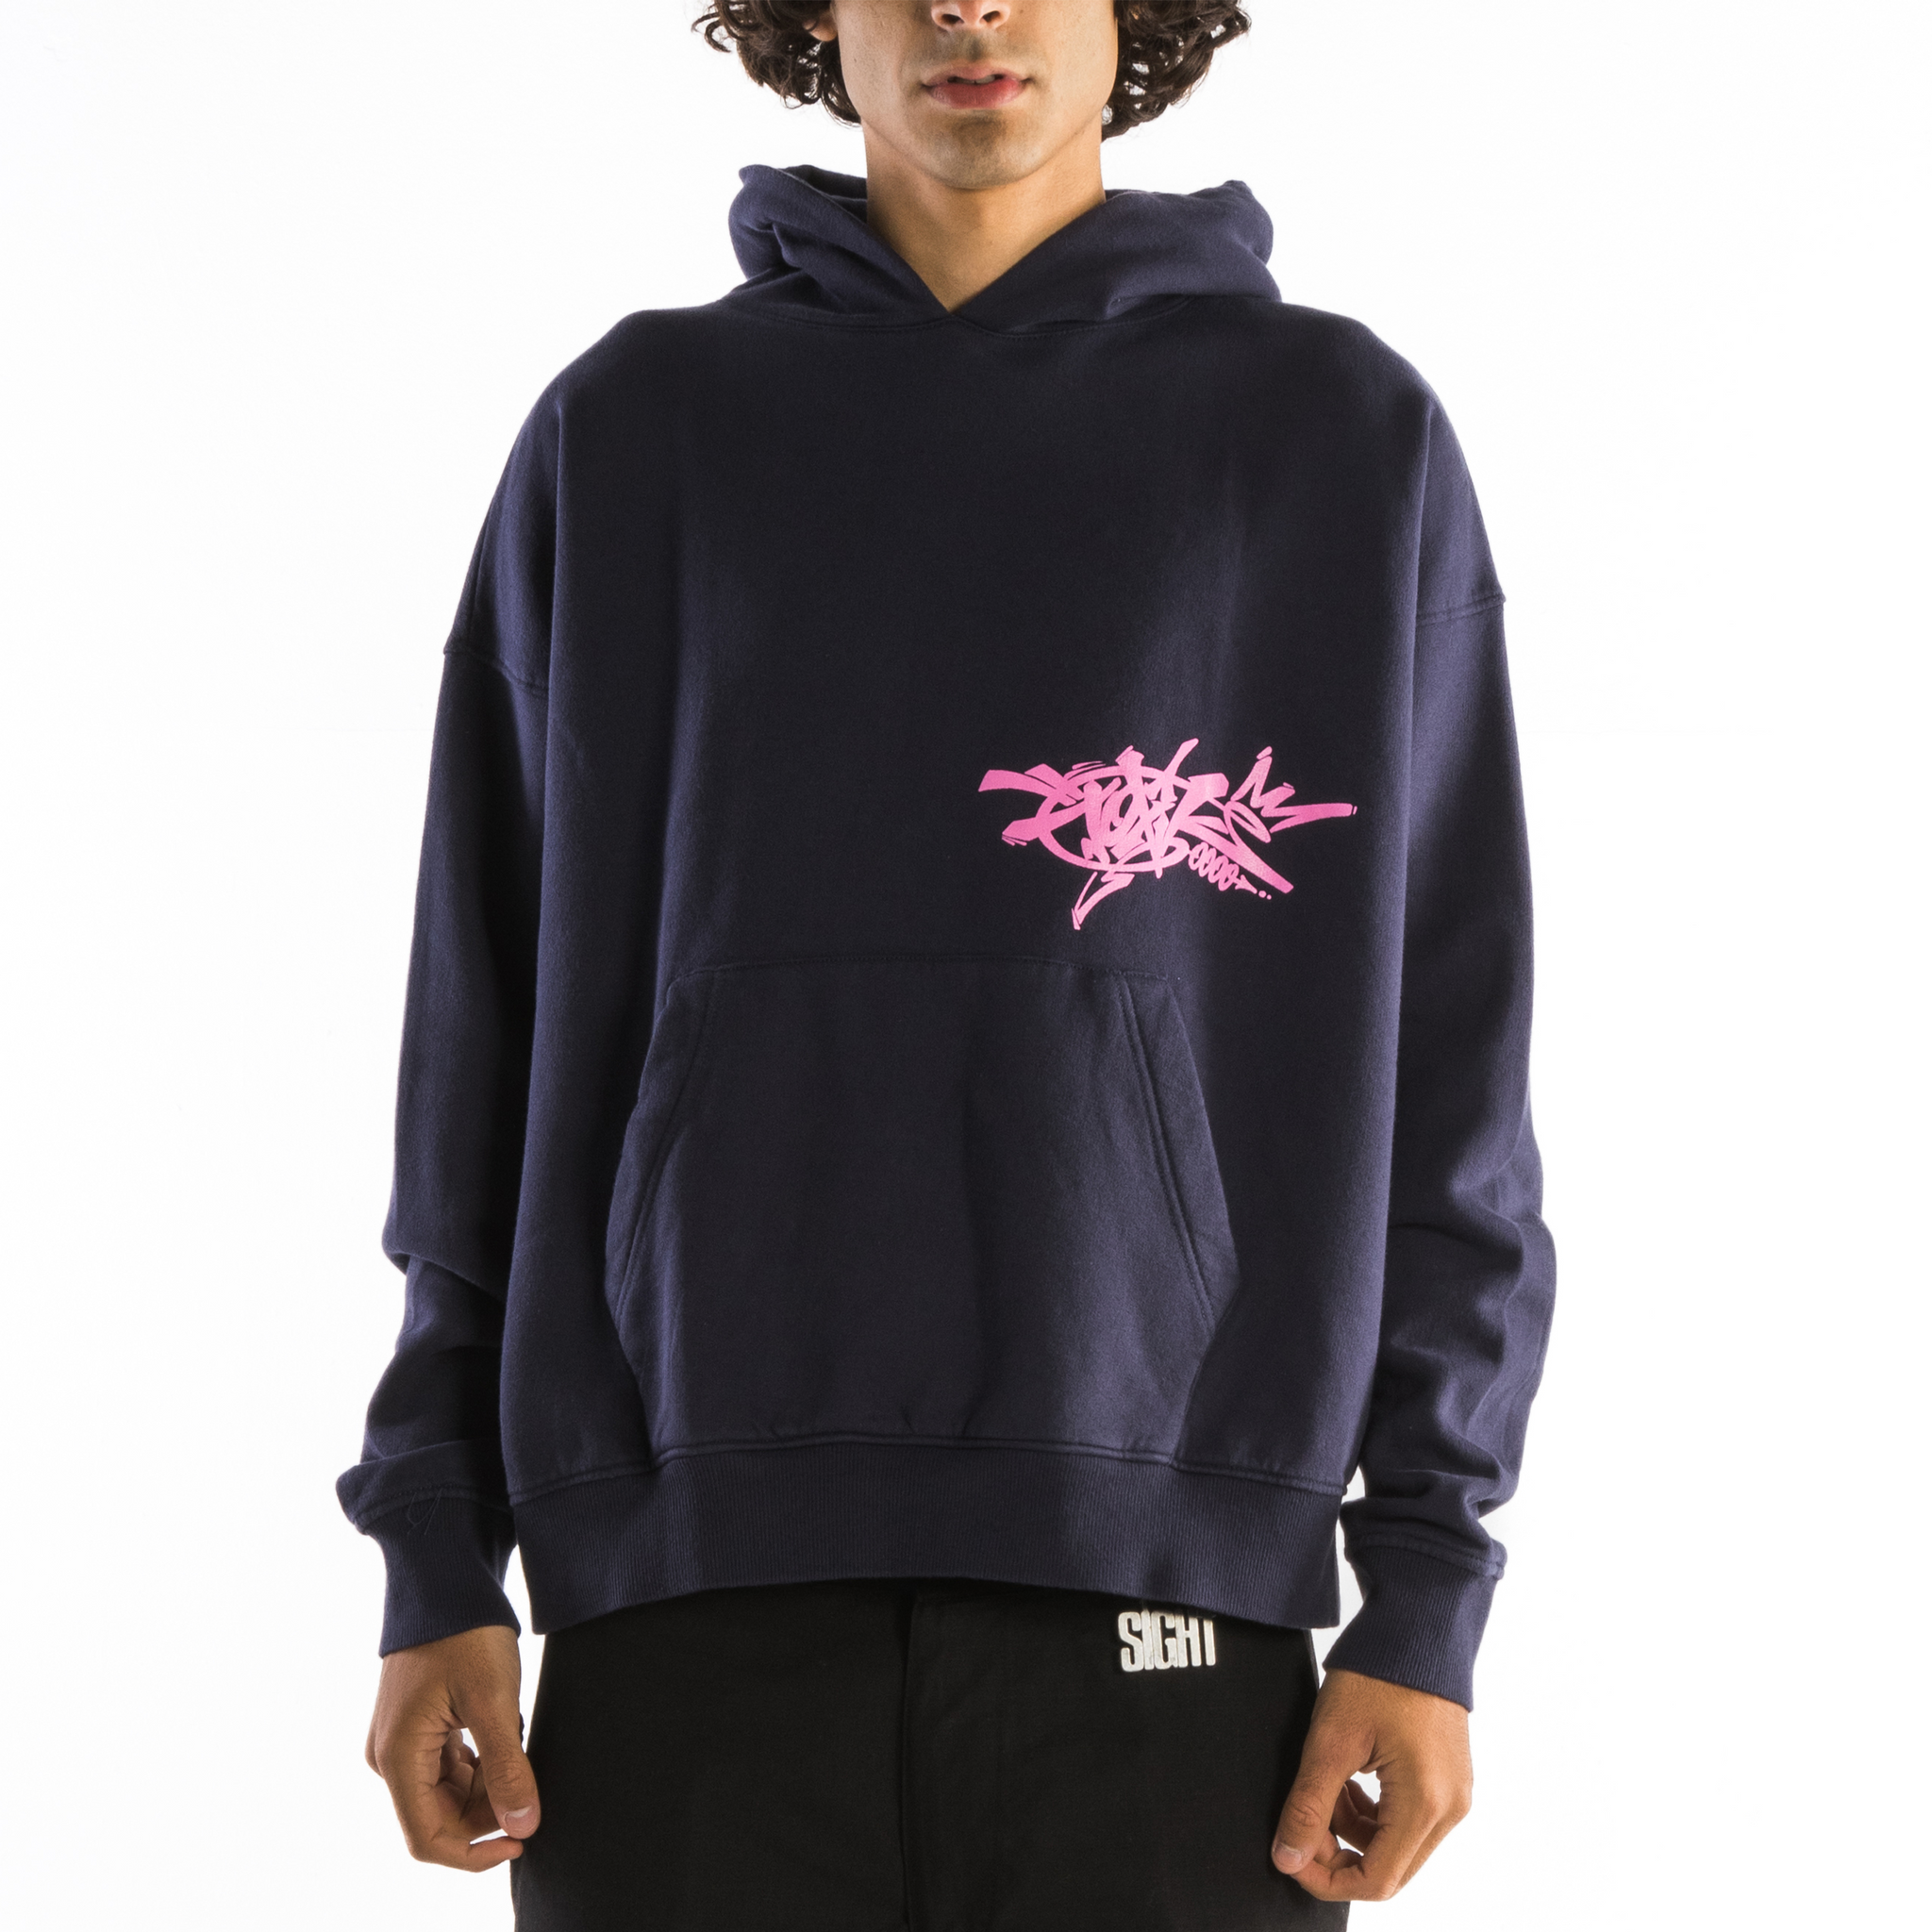 TOXIK Pink "Icon" Graphic Navy Hoodie